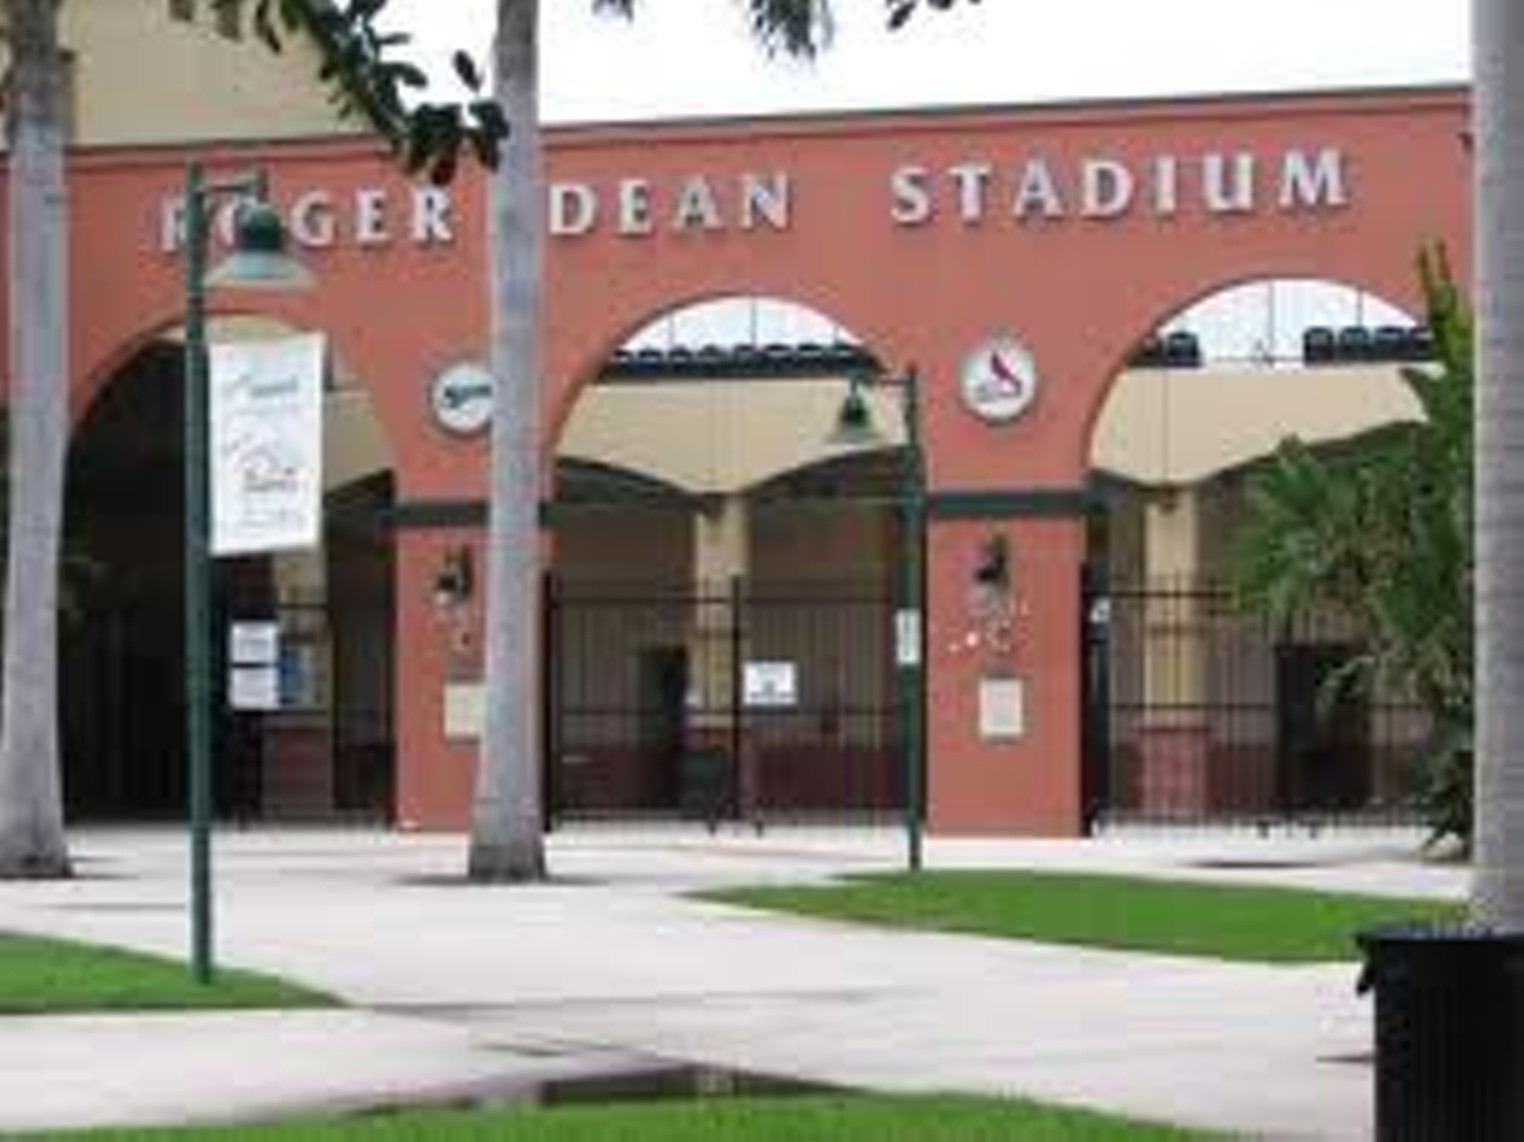 Best Sports Venue 2004 Roger Dean Stadium Sports and Recreation South Florida pic